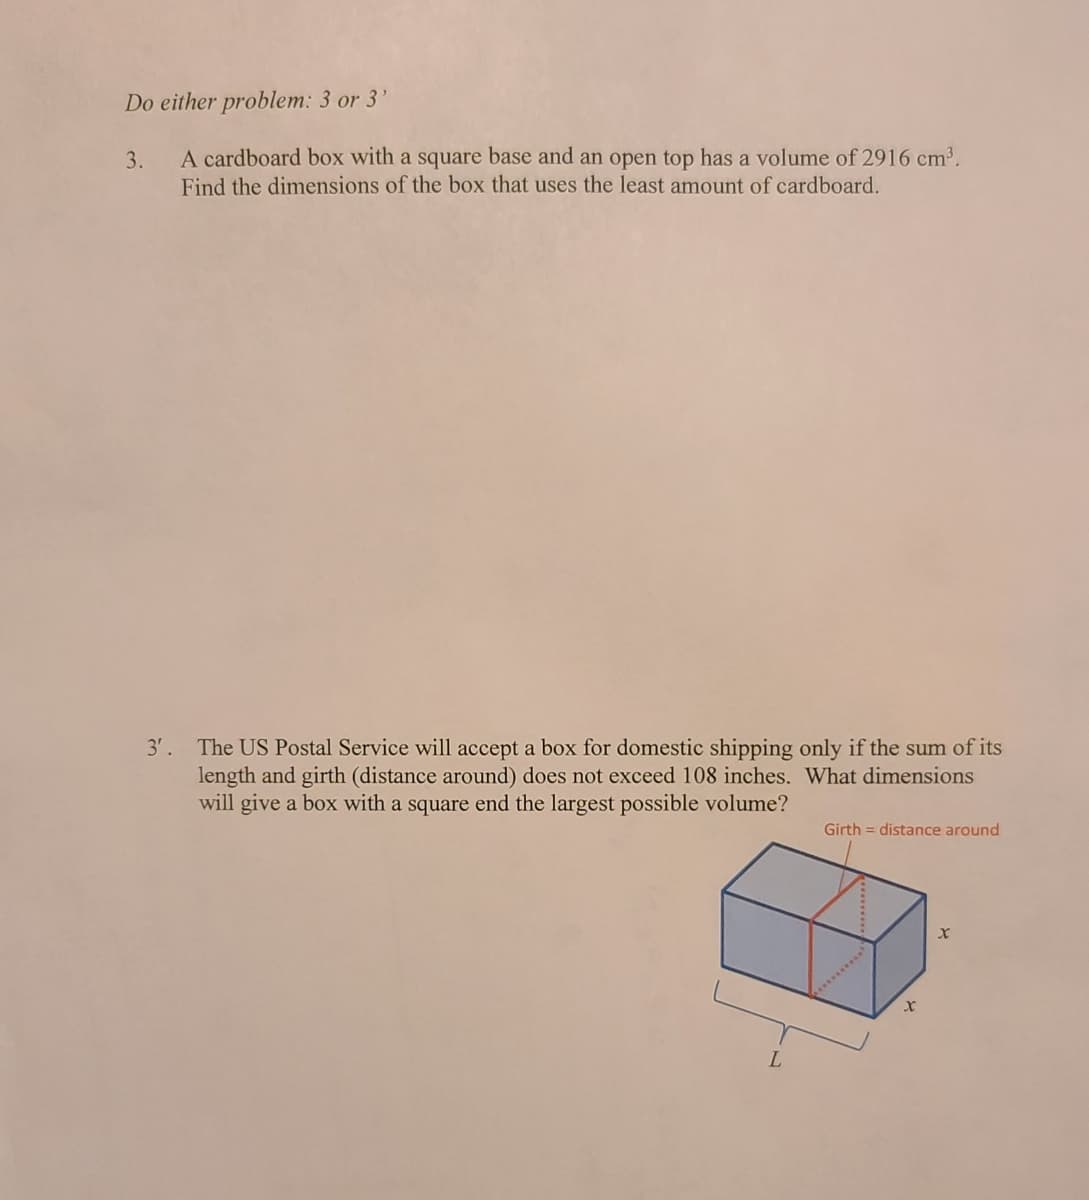 Do either problem: 3 or 3'
A cardboard box with a square base and an open top has a volume of 2916 cm³.
Find the dimensions of the box that uses the least amount of cardboard.
3.
3'. The US Postal Service will accept a box for domestic shipping only if the sum of its
length and girth (distance around) does not exceed 108 inches. What dimensions
will give a box with a square end the largest possible volume?
Girth = distance around
**..**
L.
